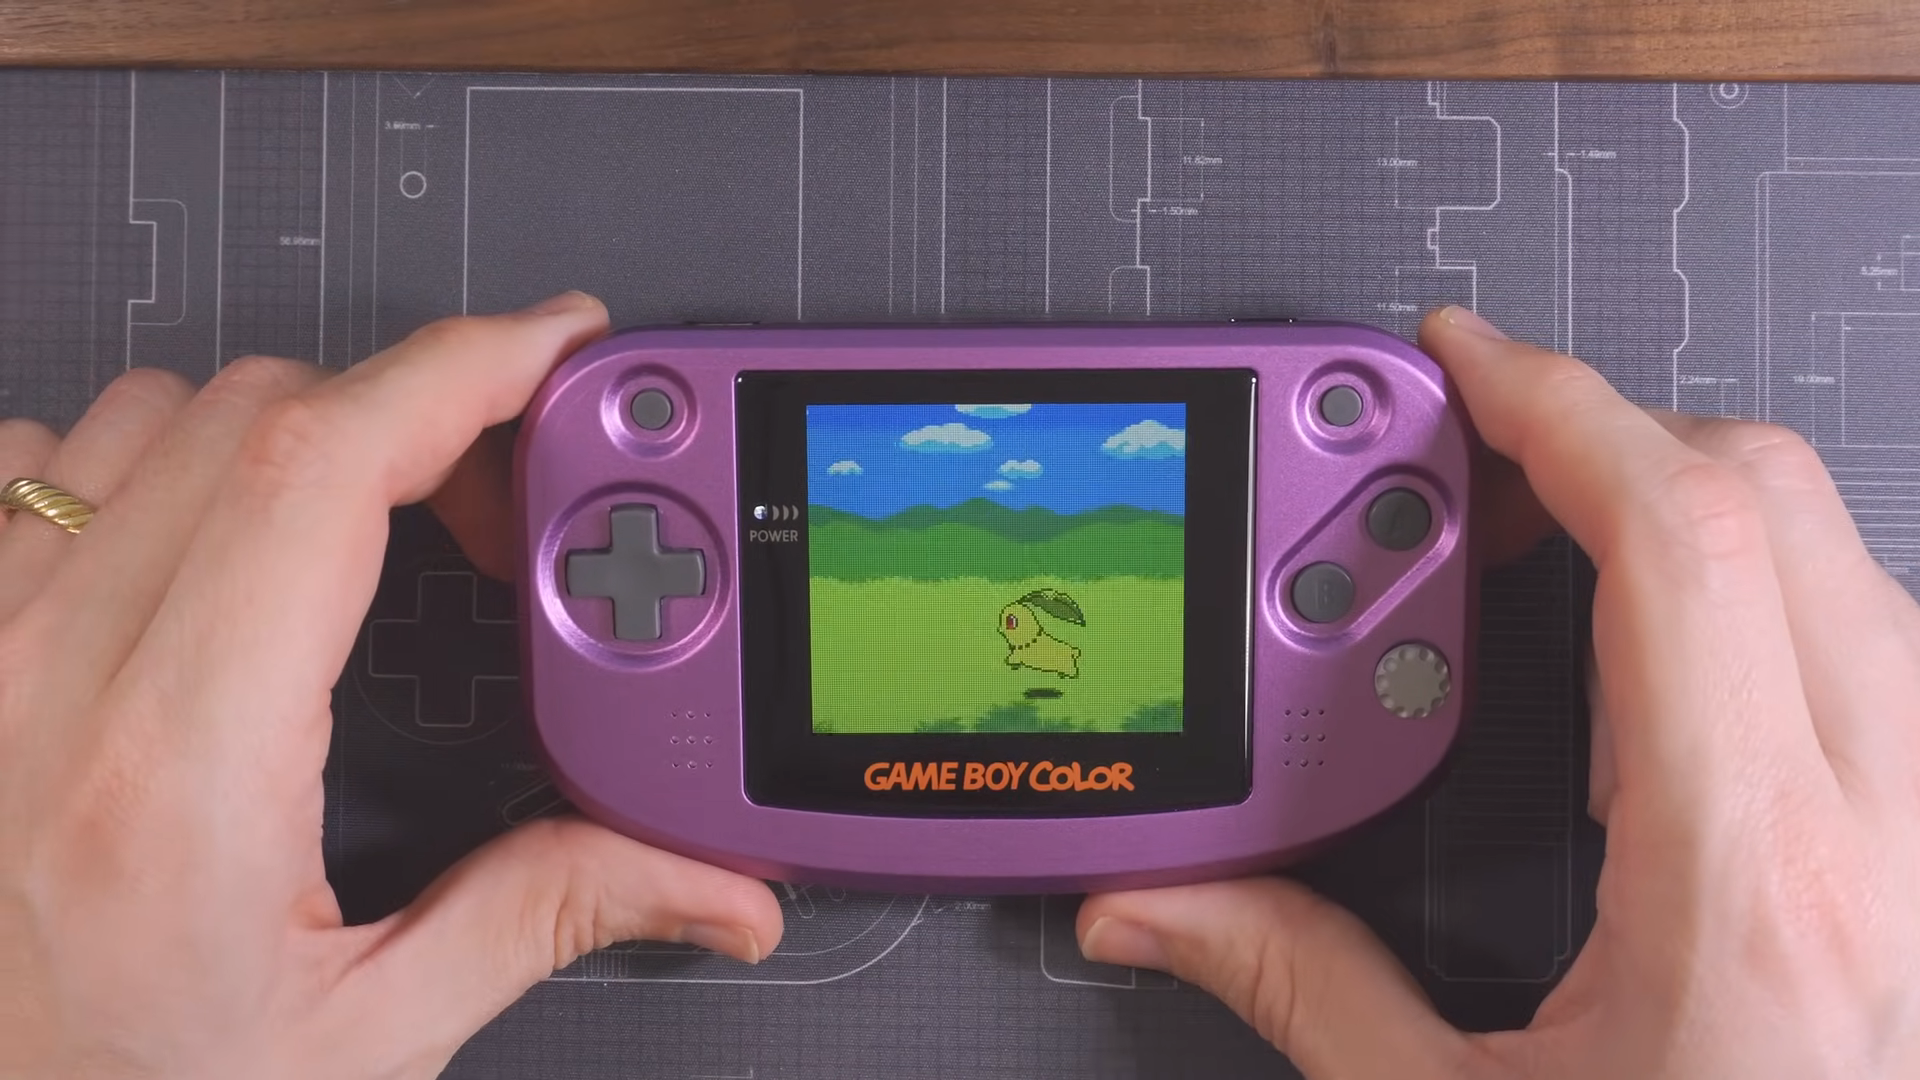 https://hackaday.com/wp-content/uploads/2023/12/I-Made-the-Game-Boy-Color-Wide-for-Good-Reason-18-7-screenshot.png